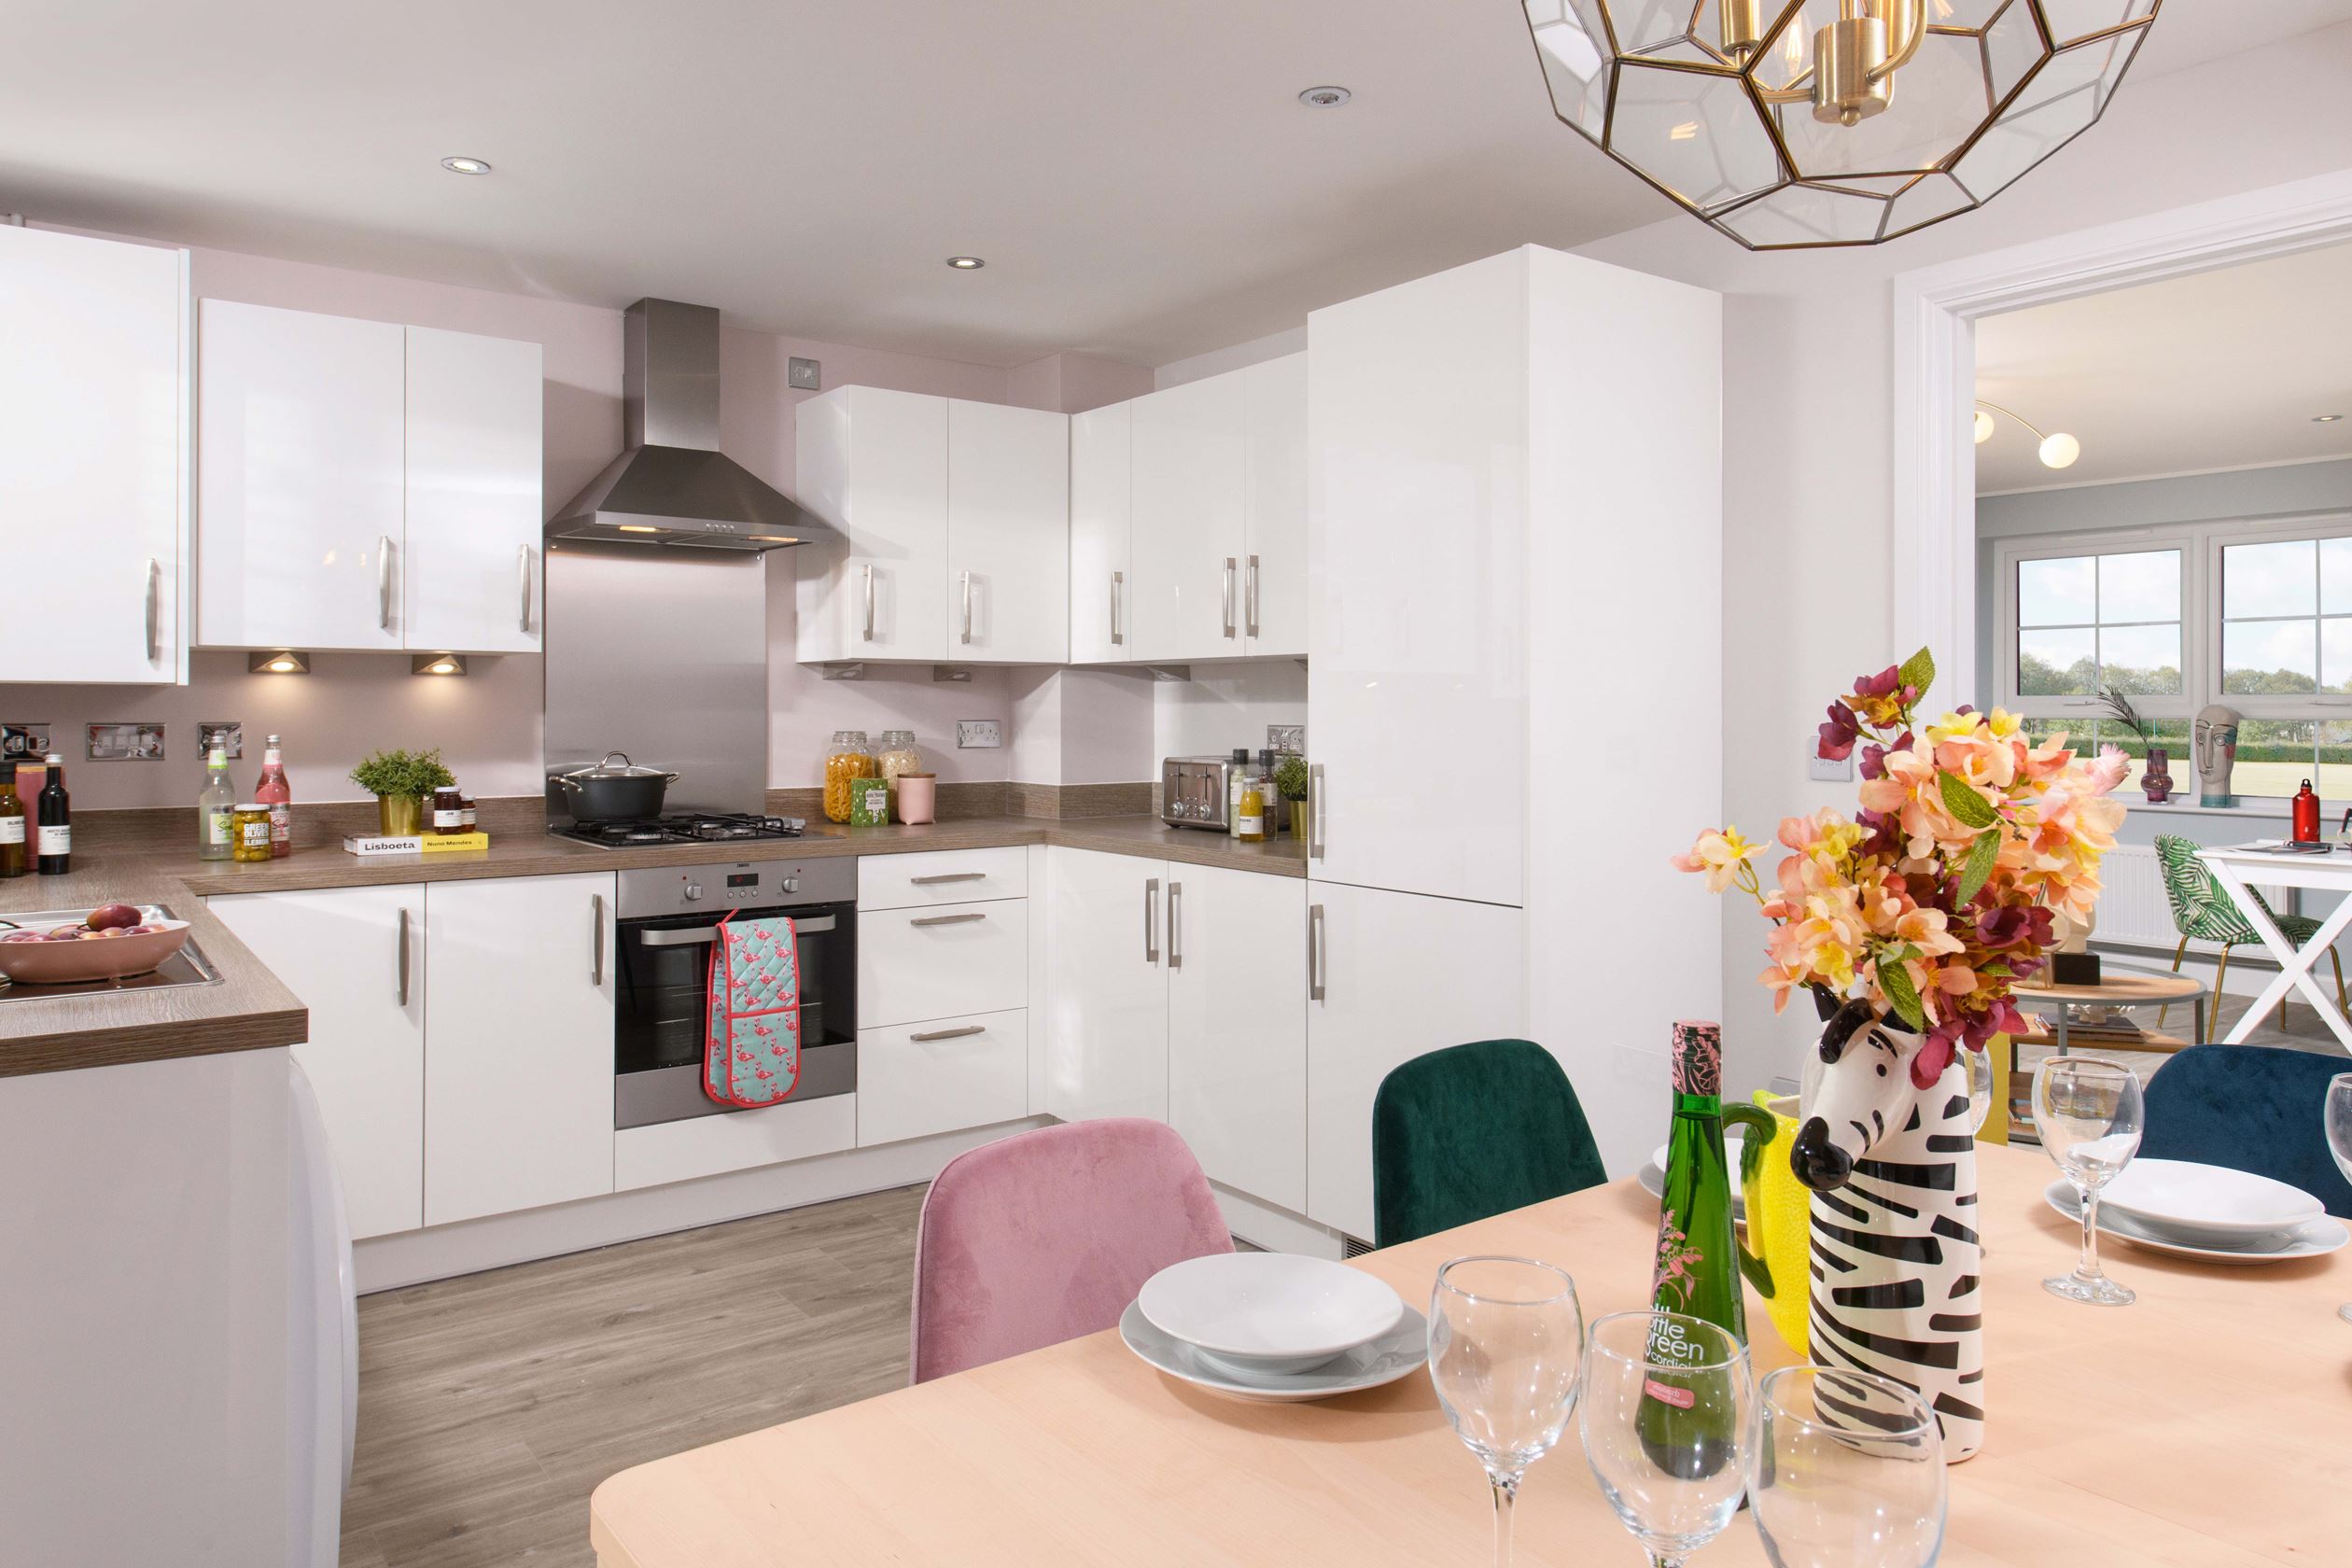 Property 2 of 10. Kitchen Diner In The Maidstone 3 Bedroom Show Home